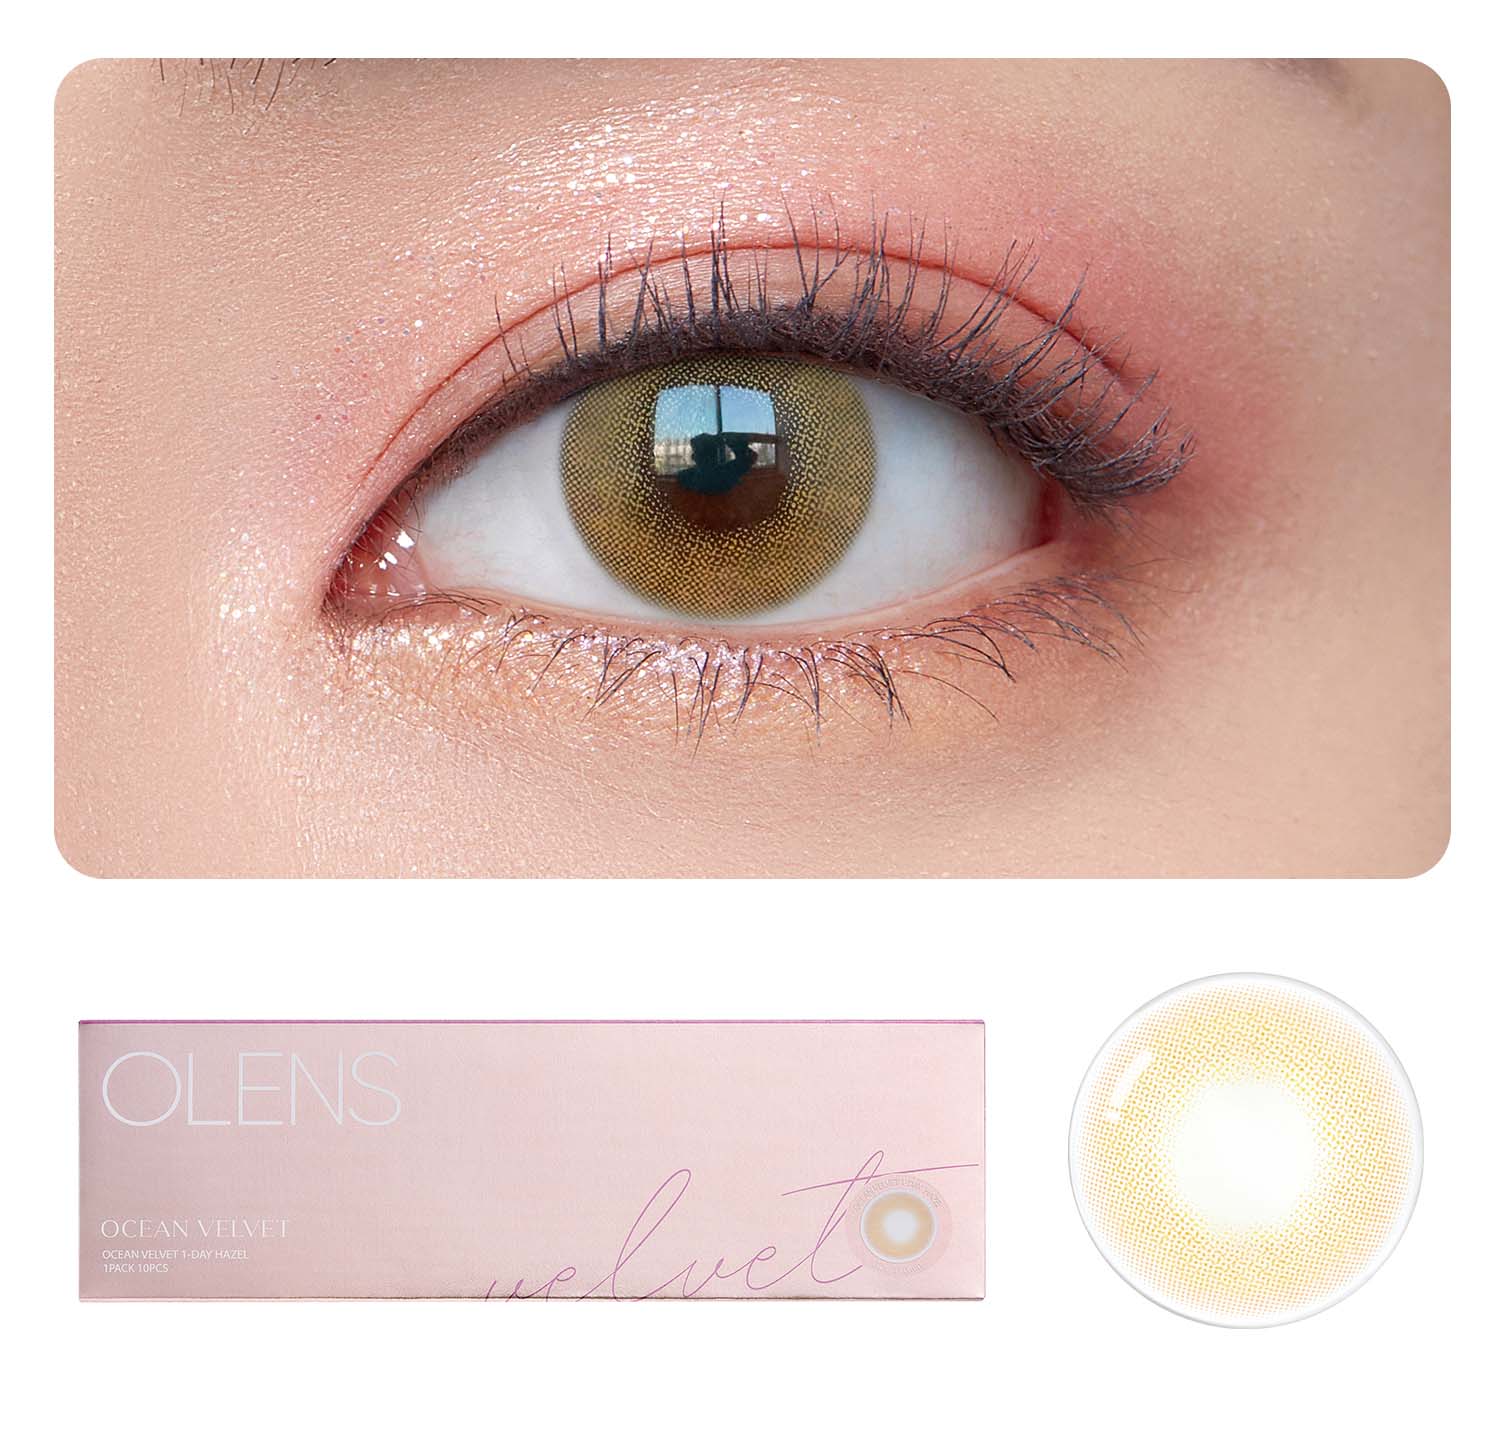 OLENS Premium Color Contact Lens | Ocean Velvet Brown contact lens | Natural looking brown lens, perfect for every Indian Skin tone | 1 day disposable trial pack | o-lens.co.in